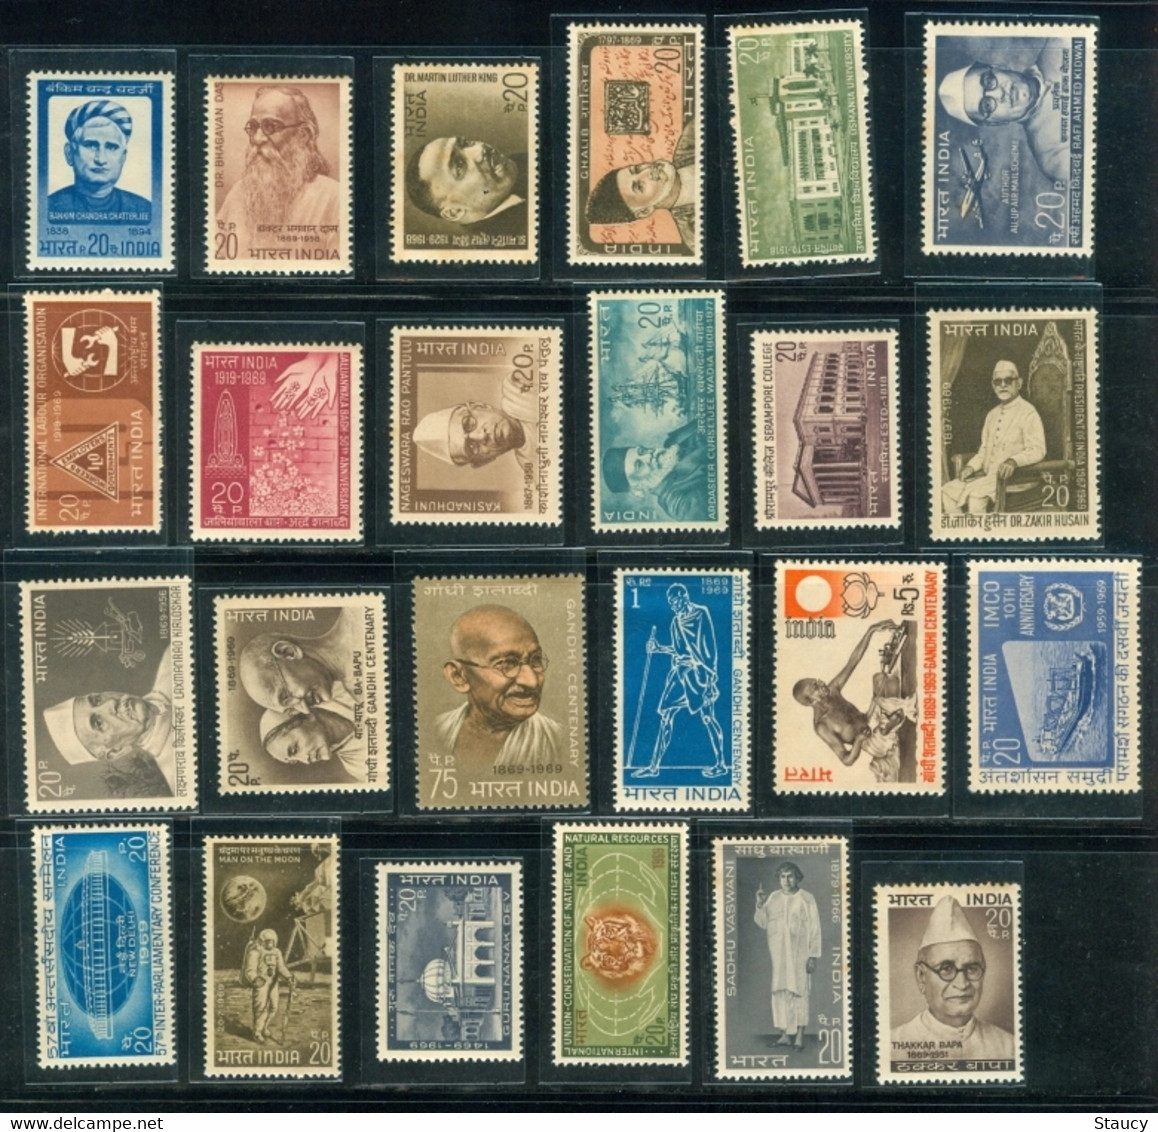 India 1969 Complete Year Pack / Set / Collection Total 24 Stamps (No Missing) MNH As Per Scan - Unused Stamps